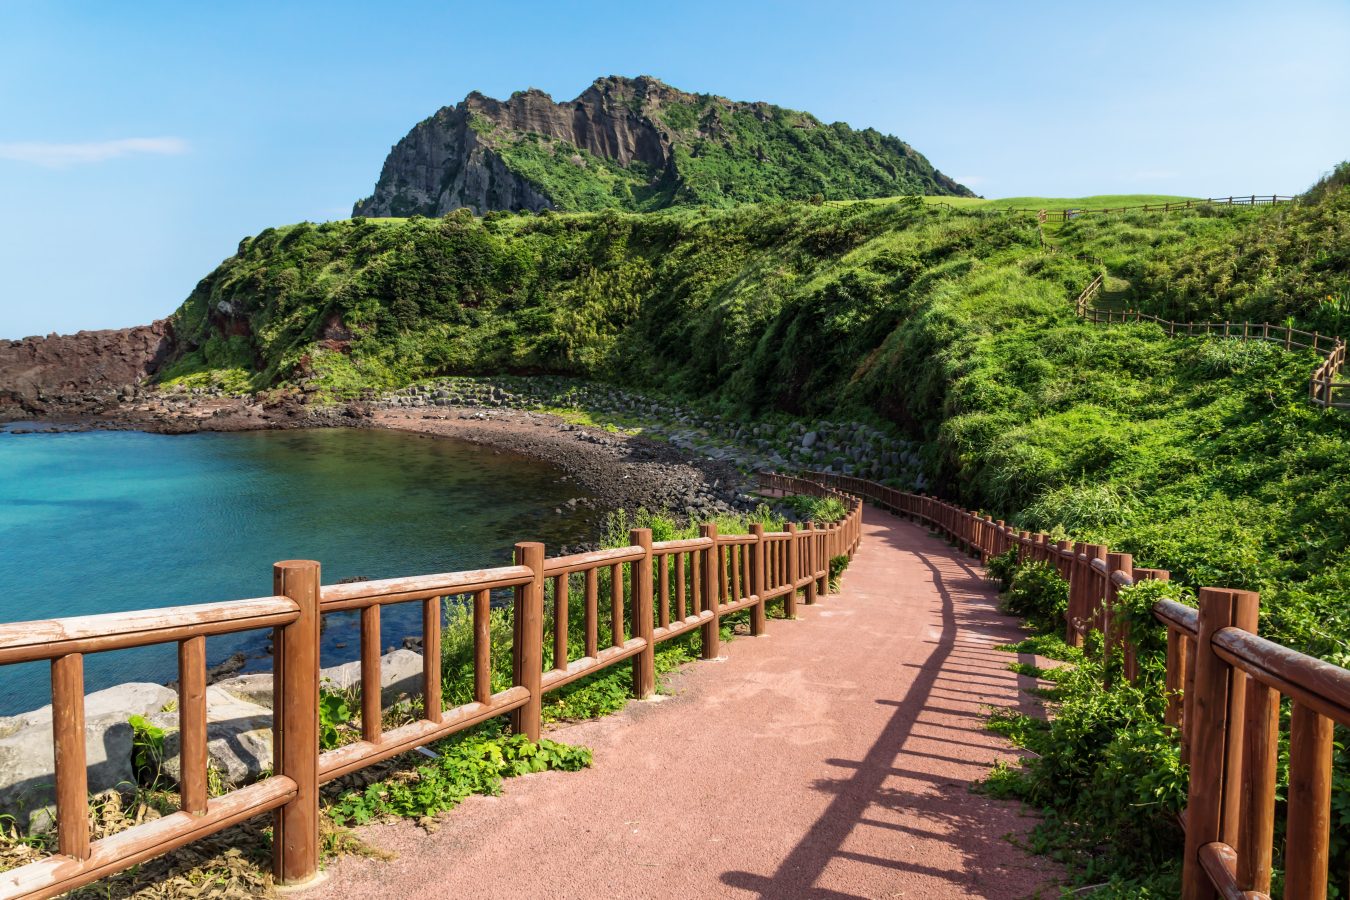 Pathway leading to beach with view over ocean and and volcano crater Ilchulbong, Seongsan, Jeju Island, South Korea.